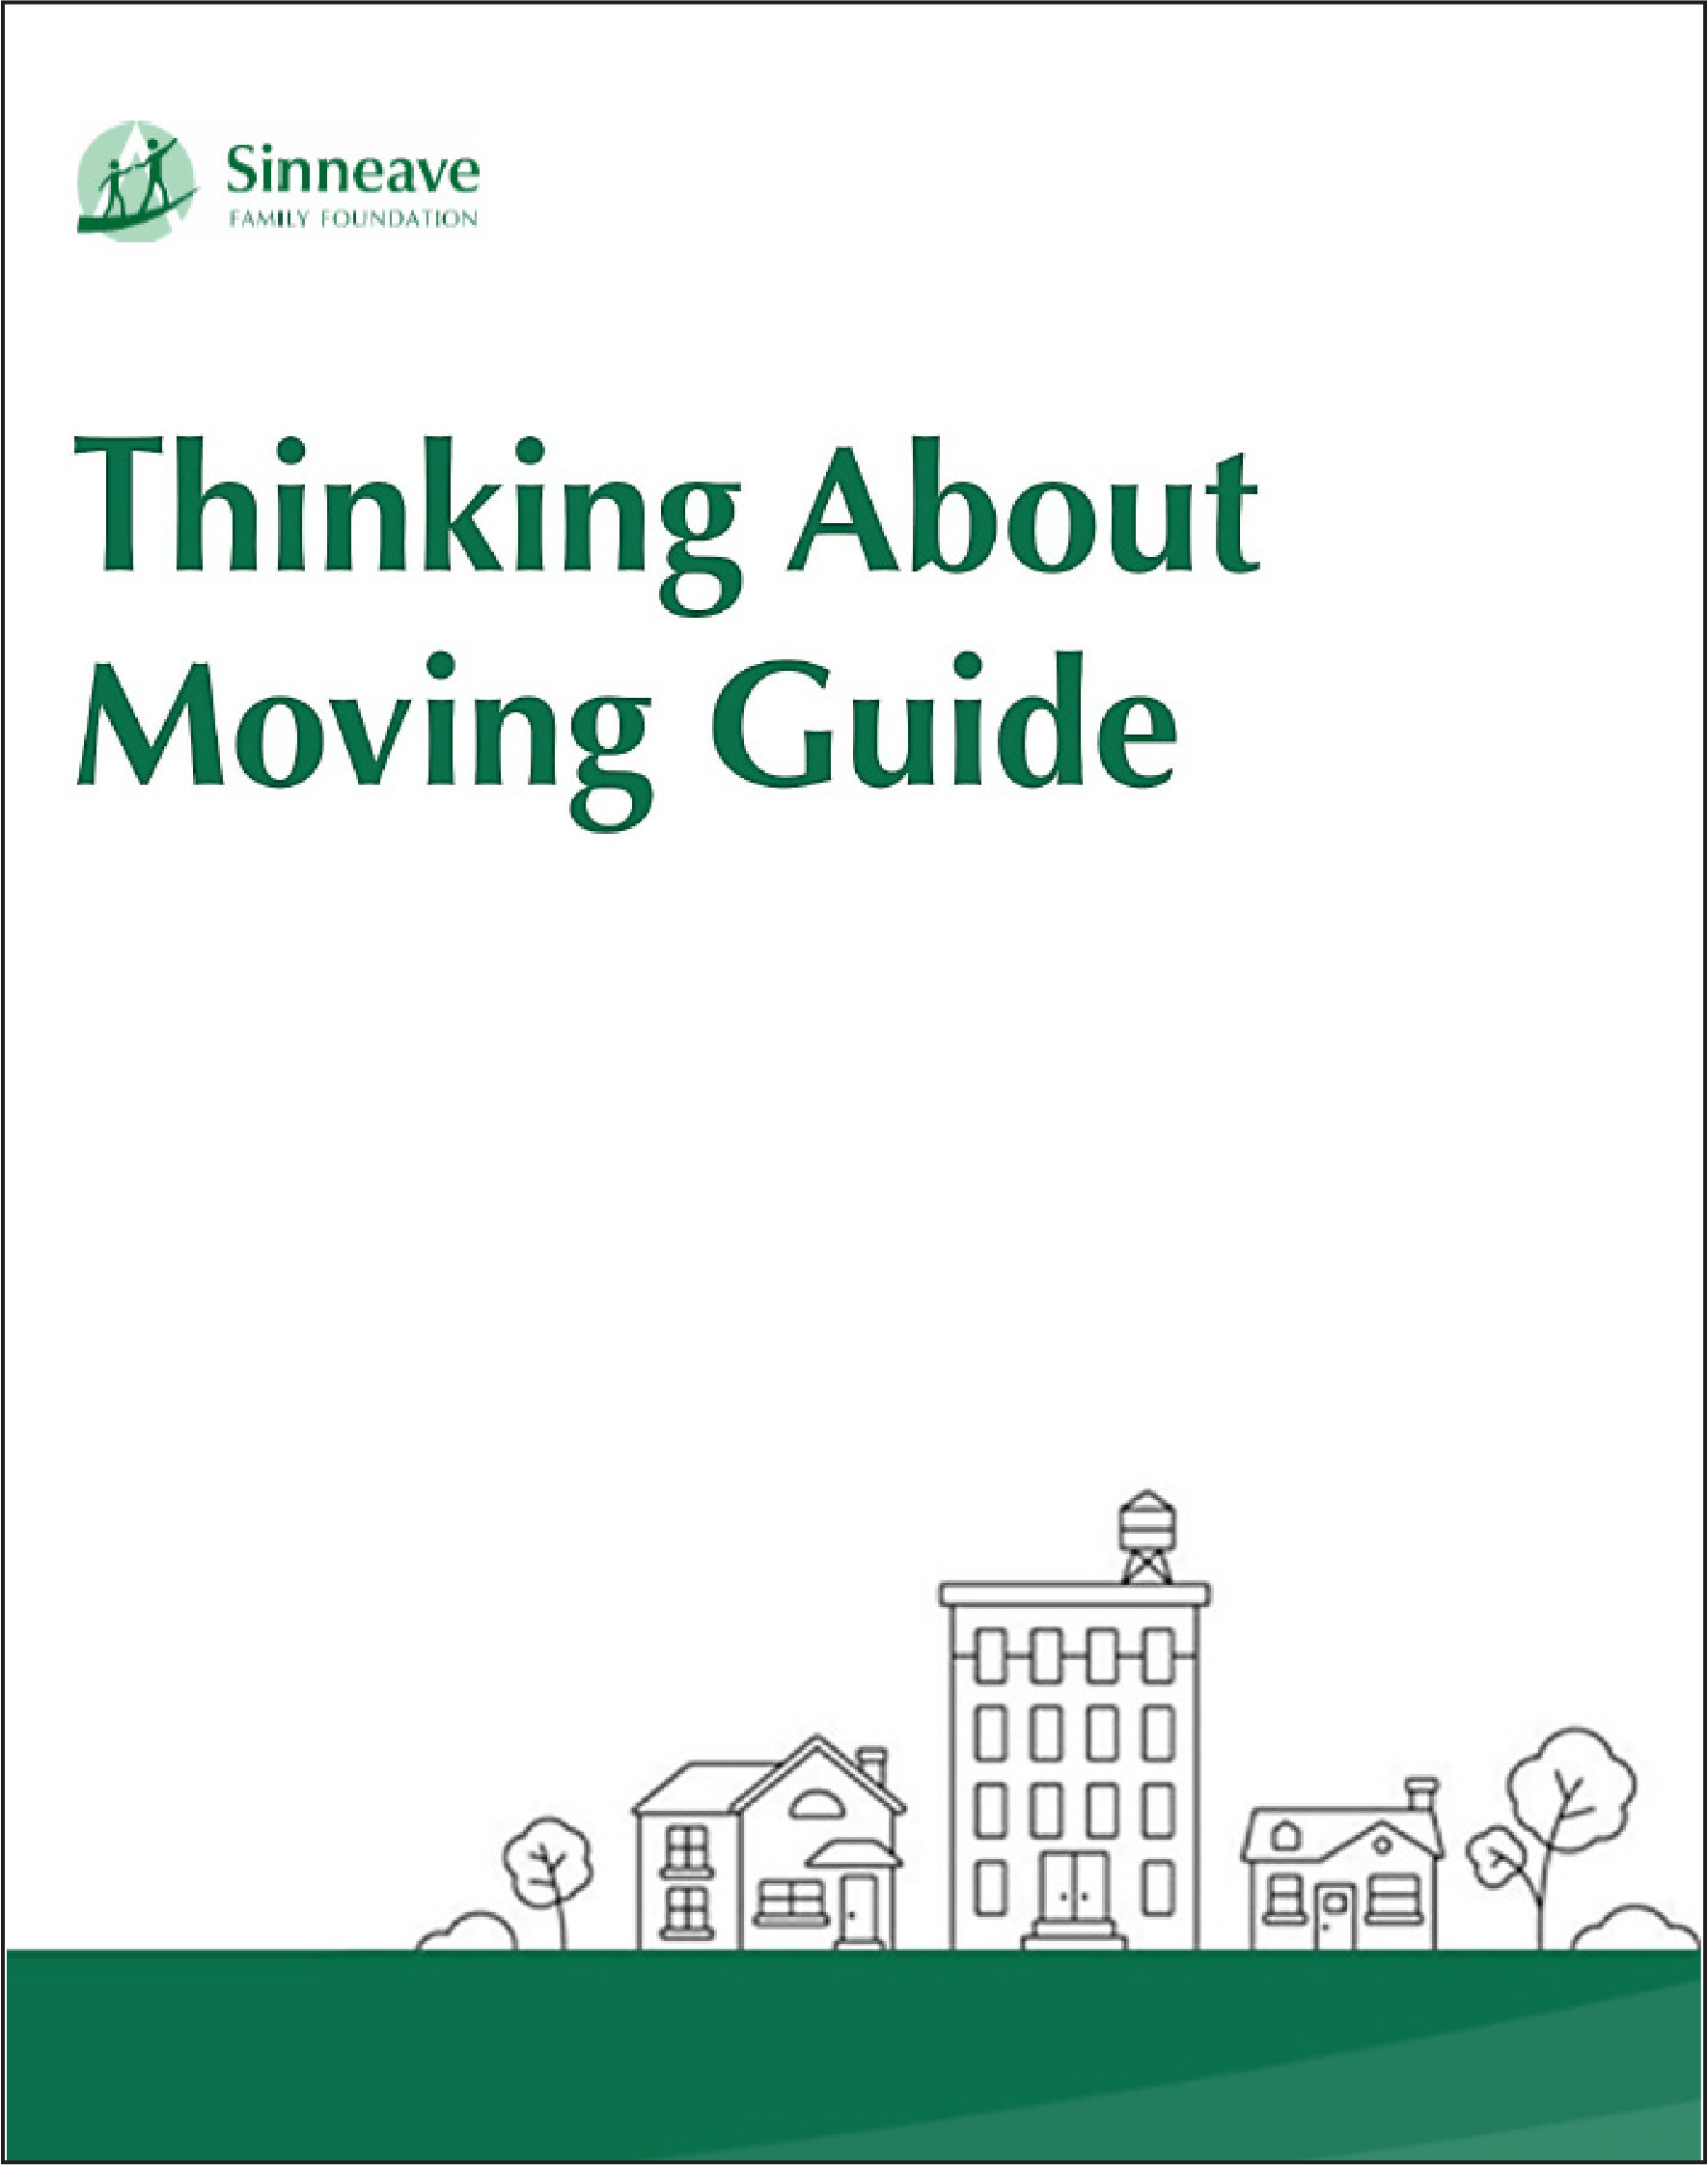 Thinking About Moving Guide image